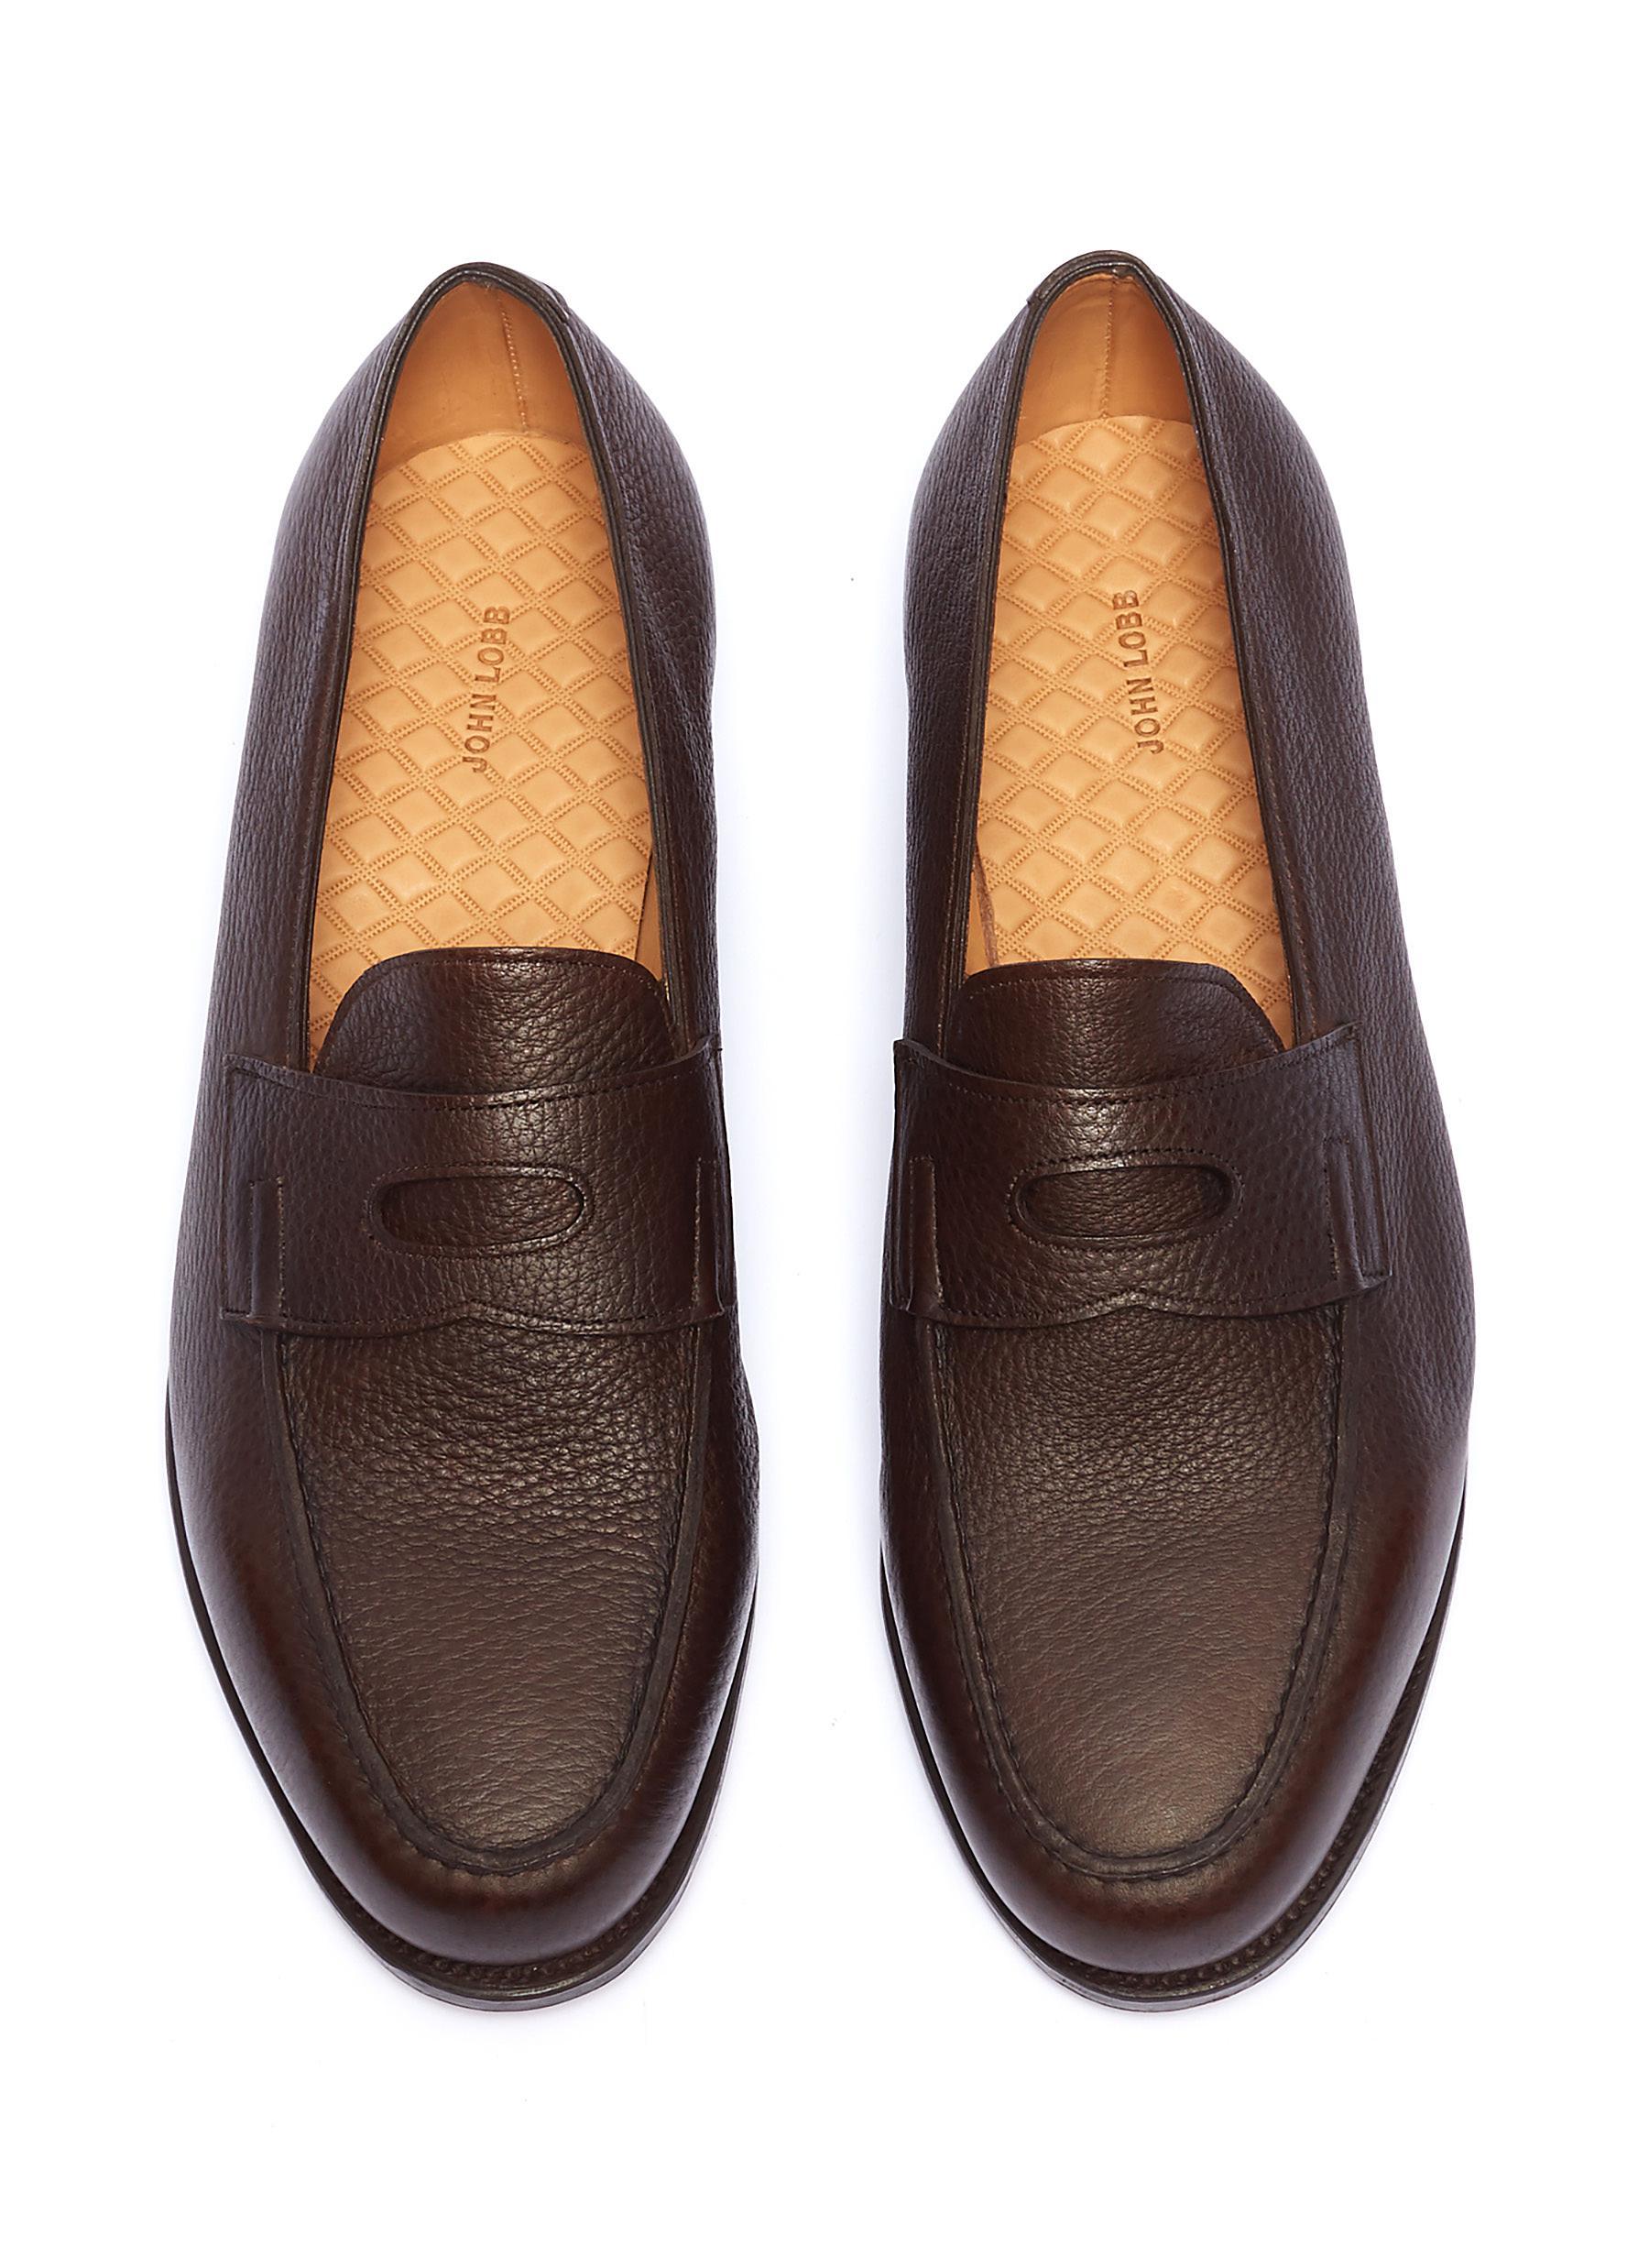 John Lobb 'lopez' Grainy Leather Penny Loafers in Brown for Men - Lyst